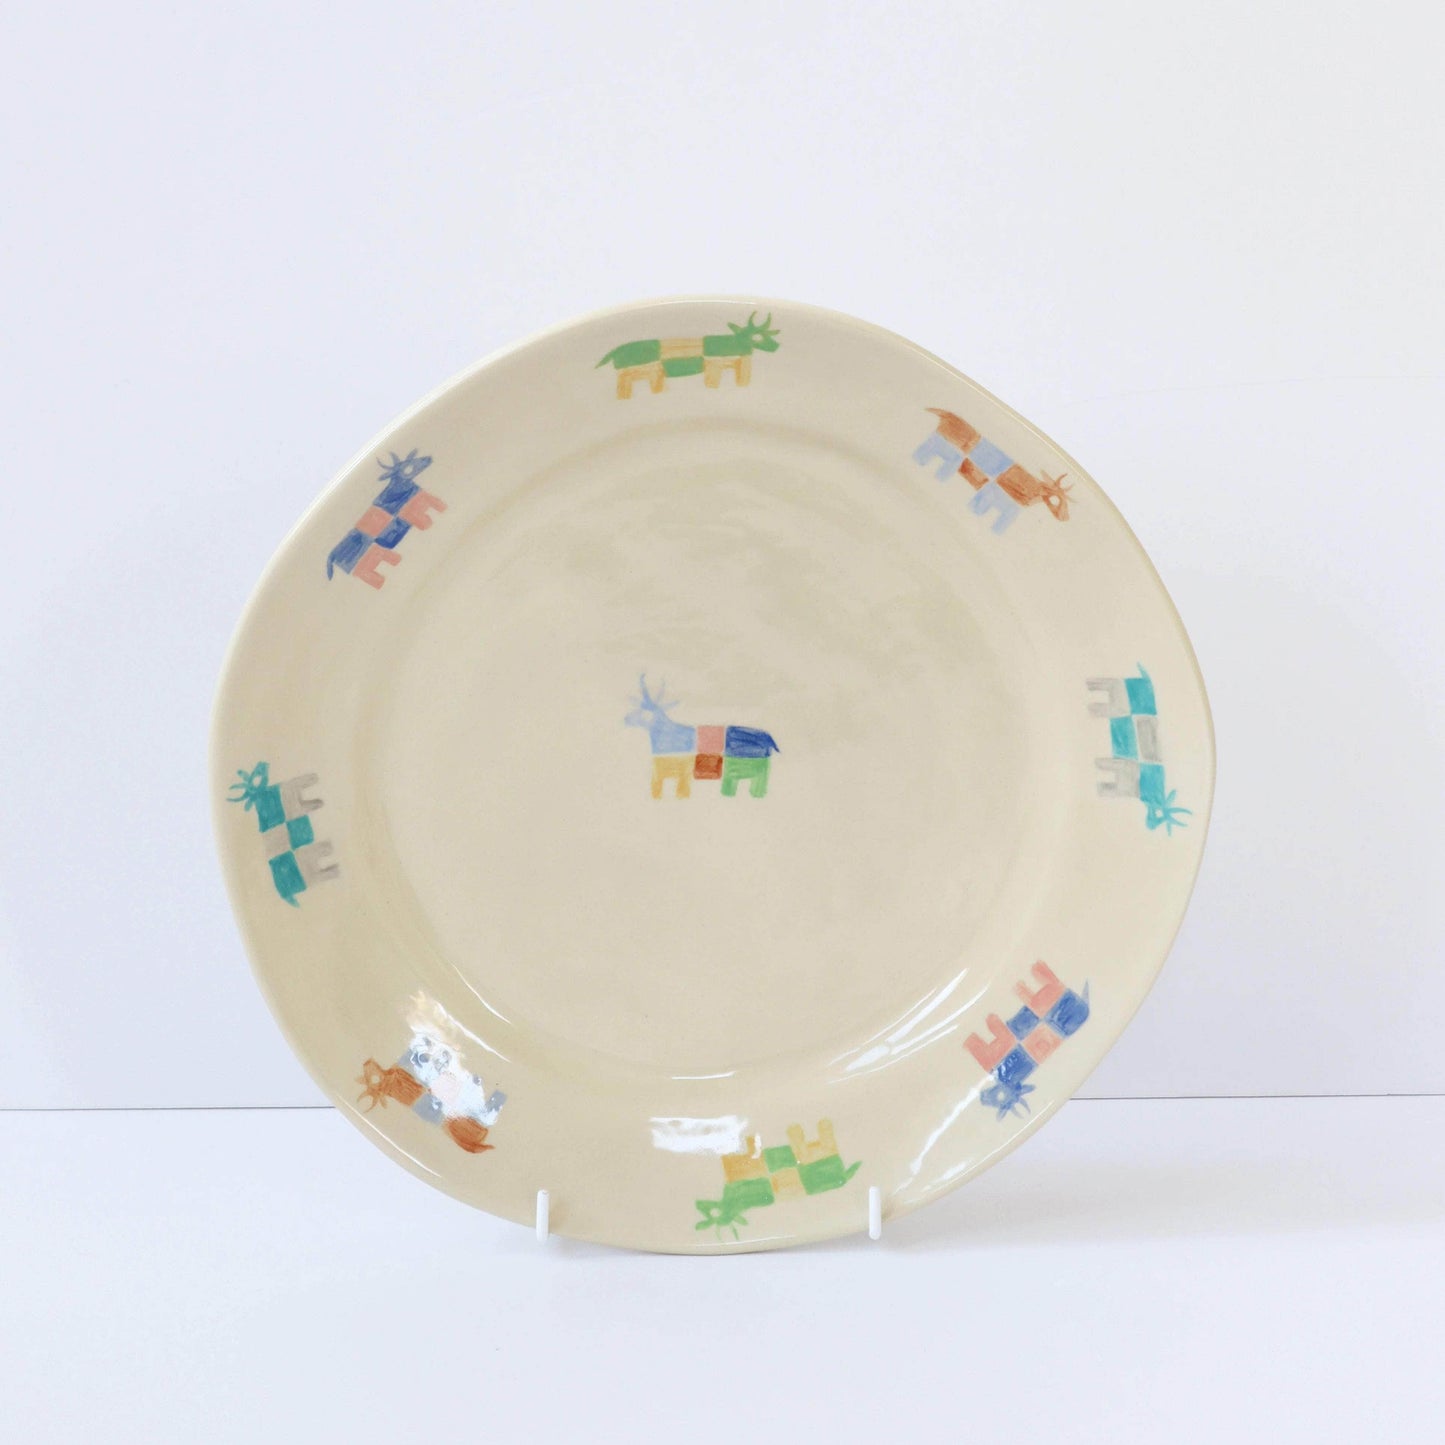 'Moo' Hand Painted Cows Plate